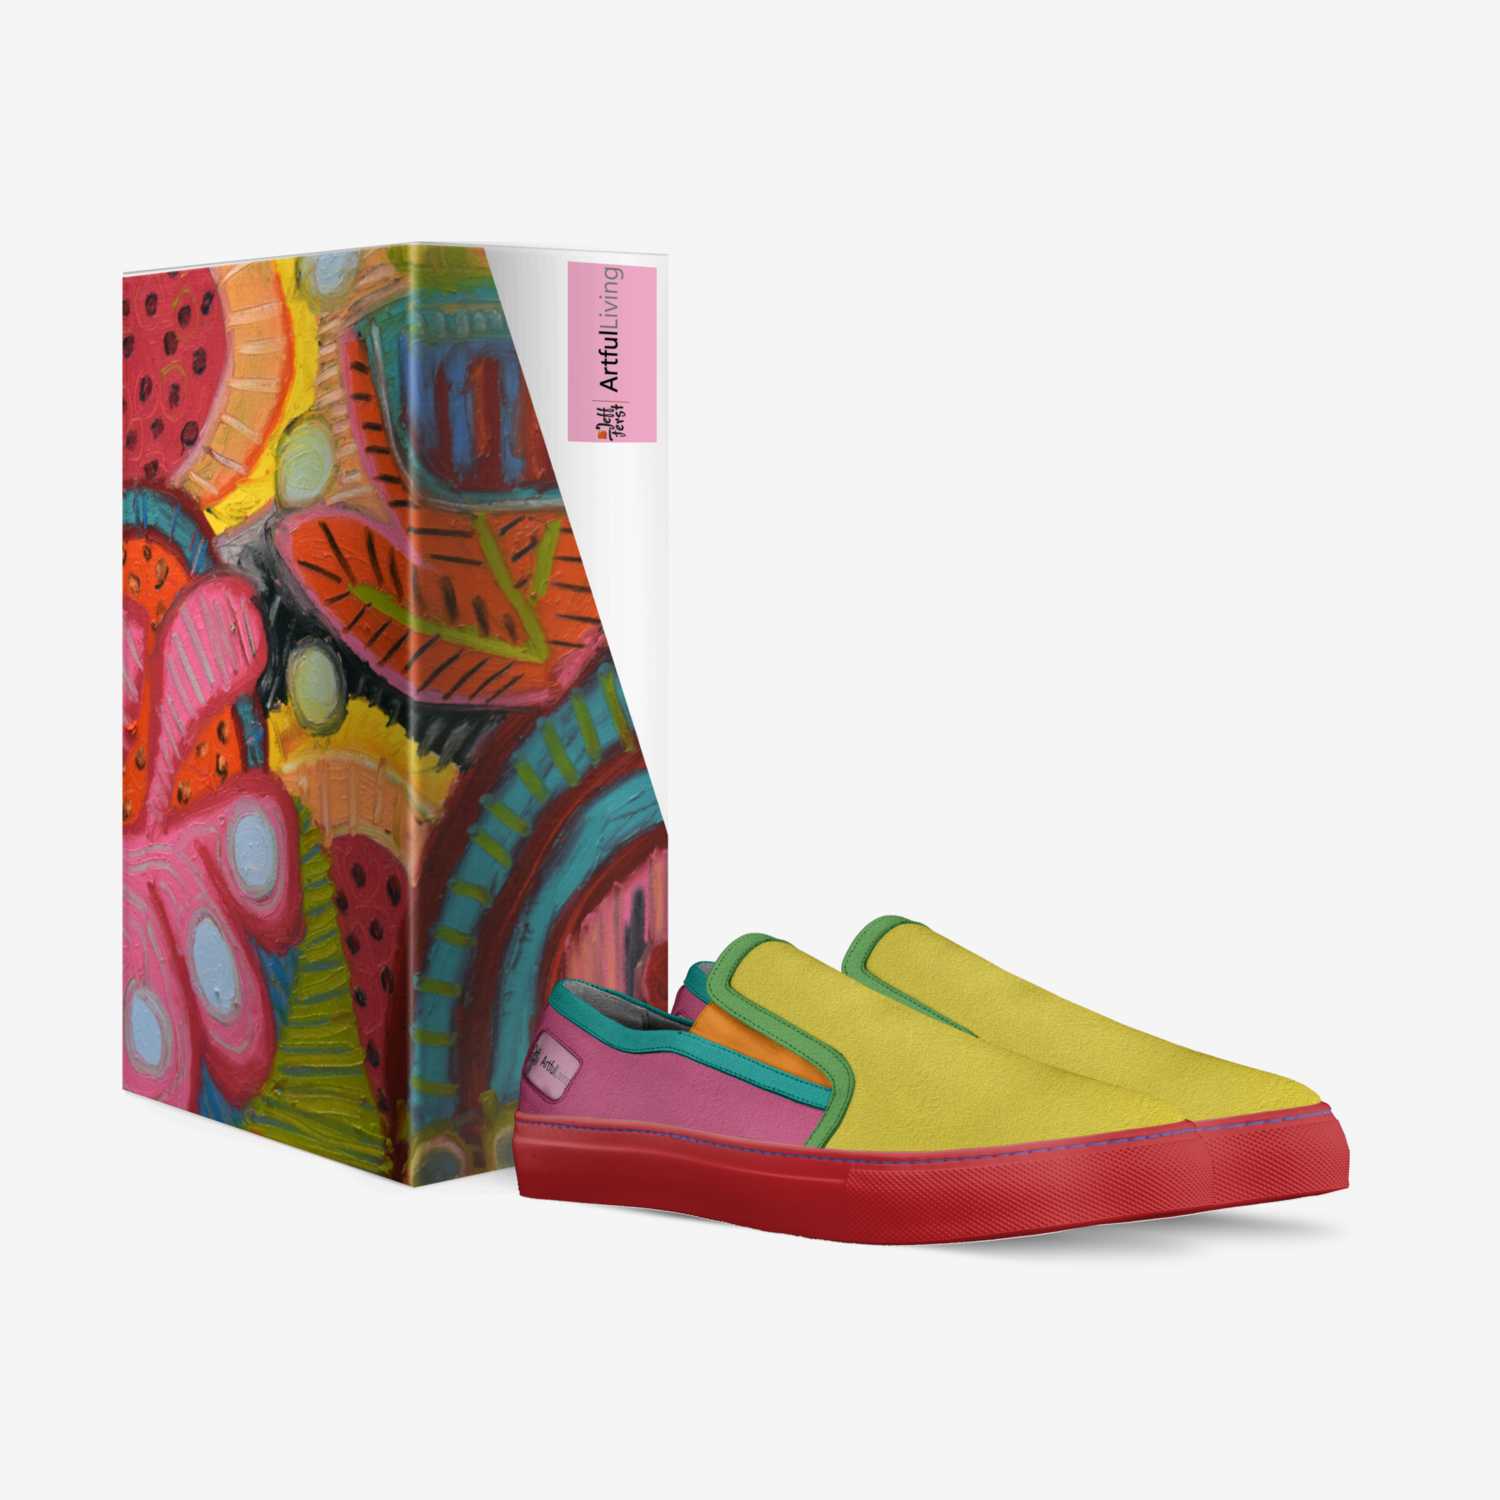 Artful Rainbow custom made in Italy shoes by Jeff Ferst | Box view